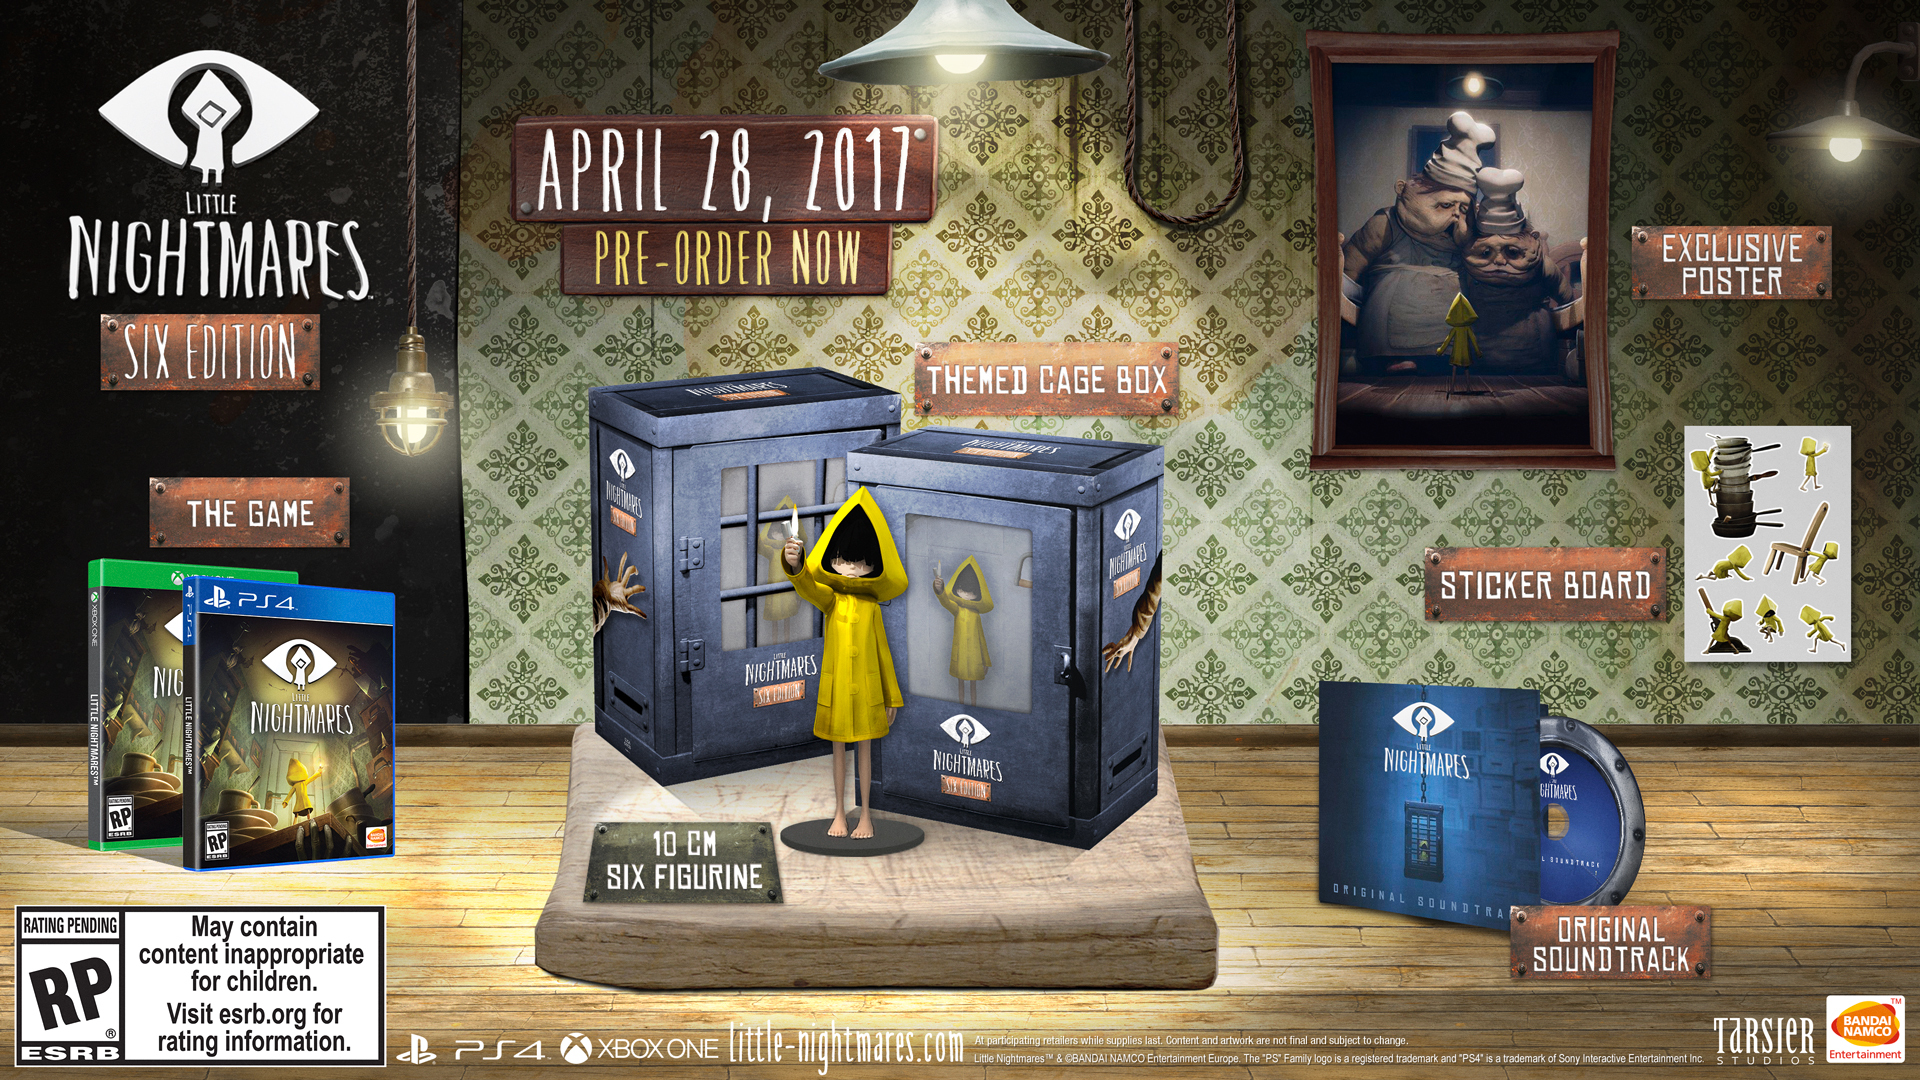 Steam :: Little Nightmares :: Release date and Collector's Edition  announced!